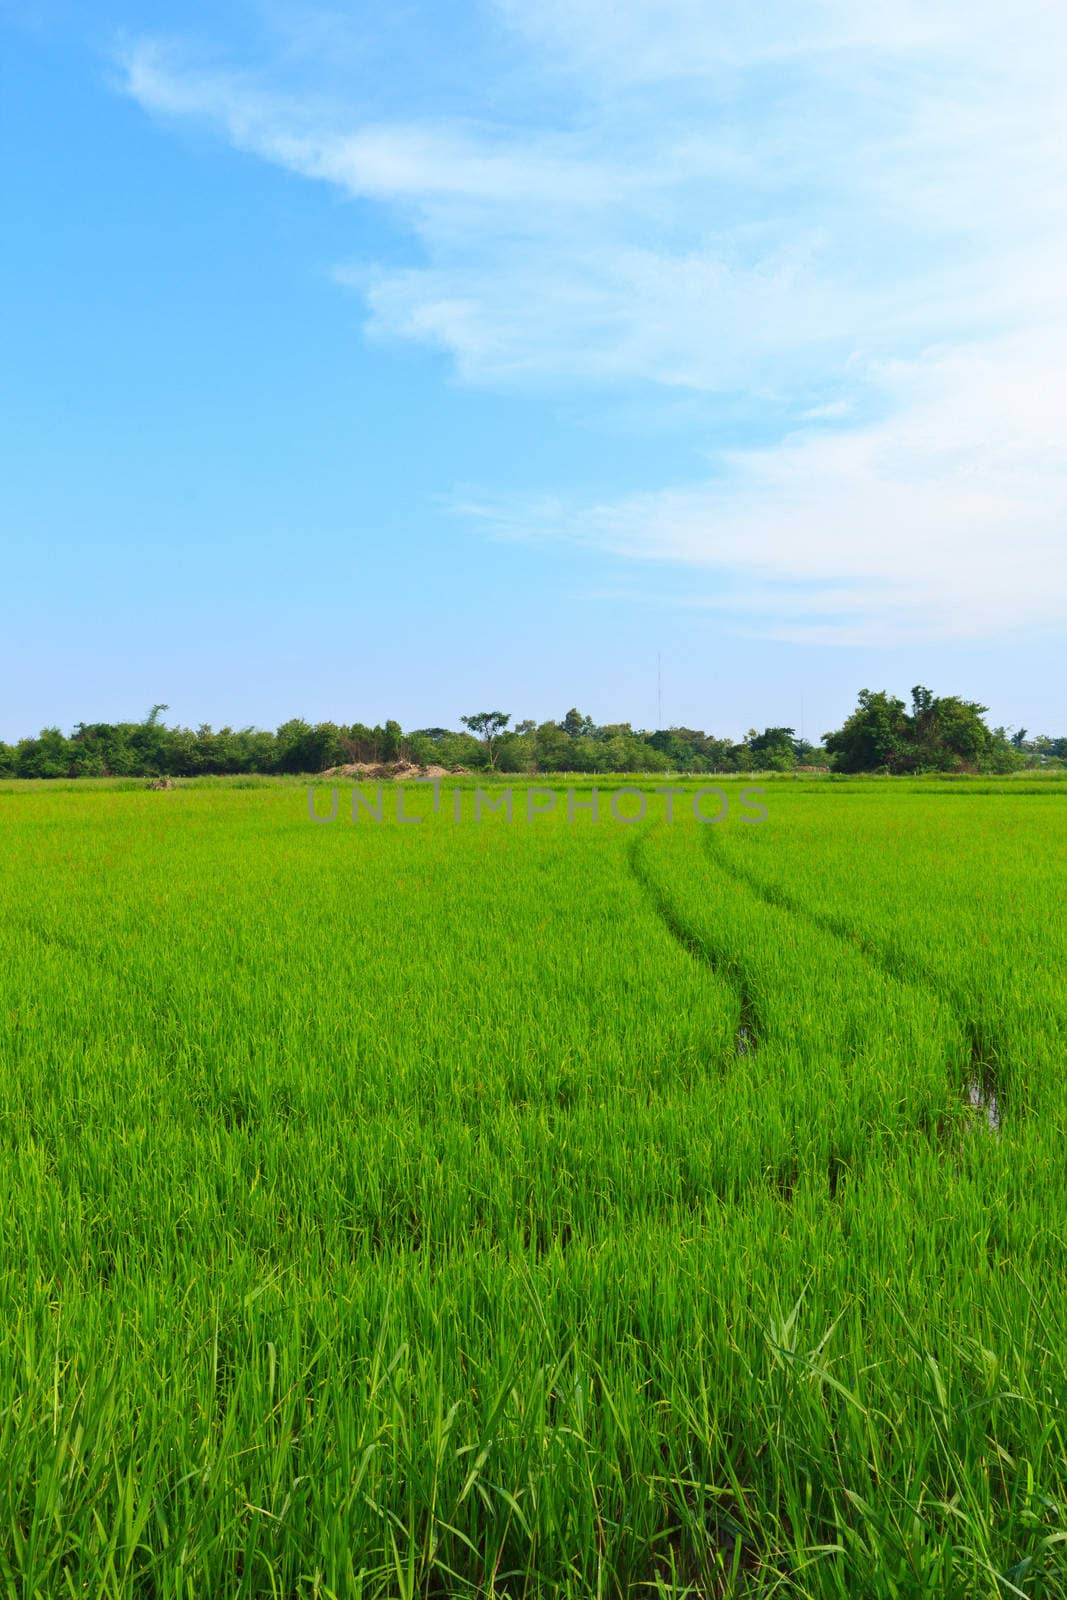 Natural field of rice and blue sky in rural area.